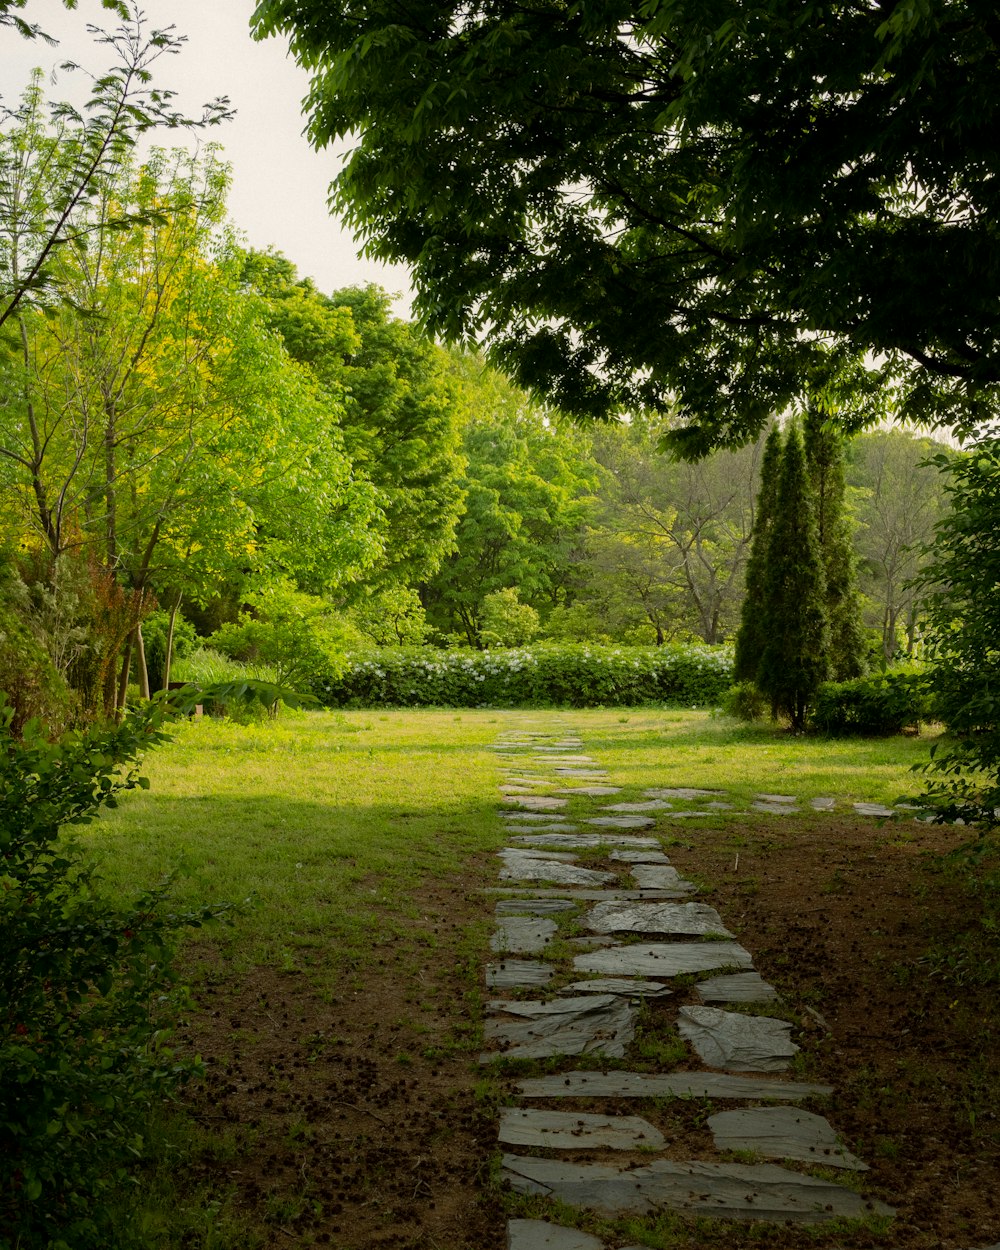 a stone path in the middle of a lush green park